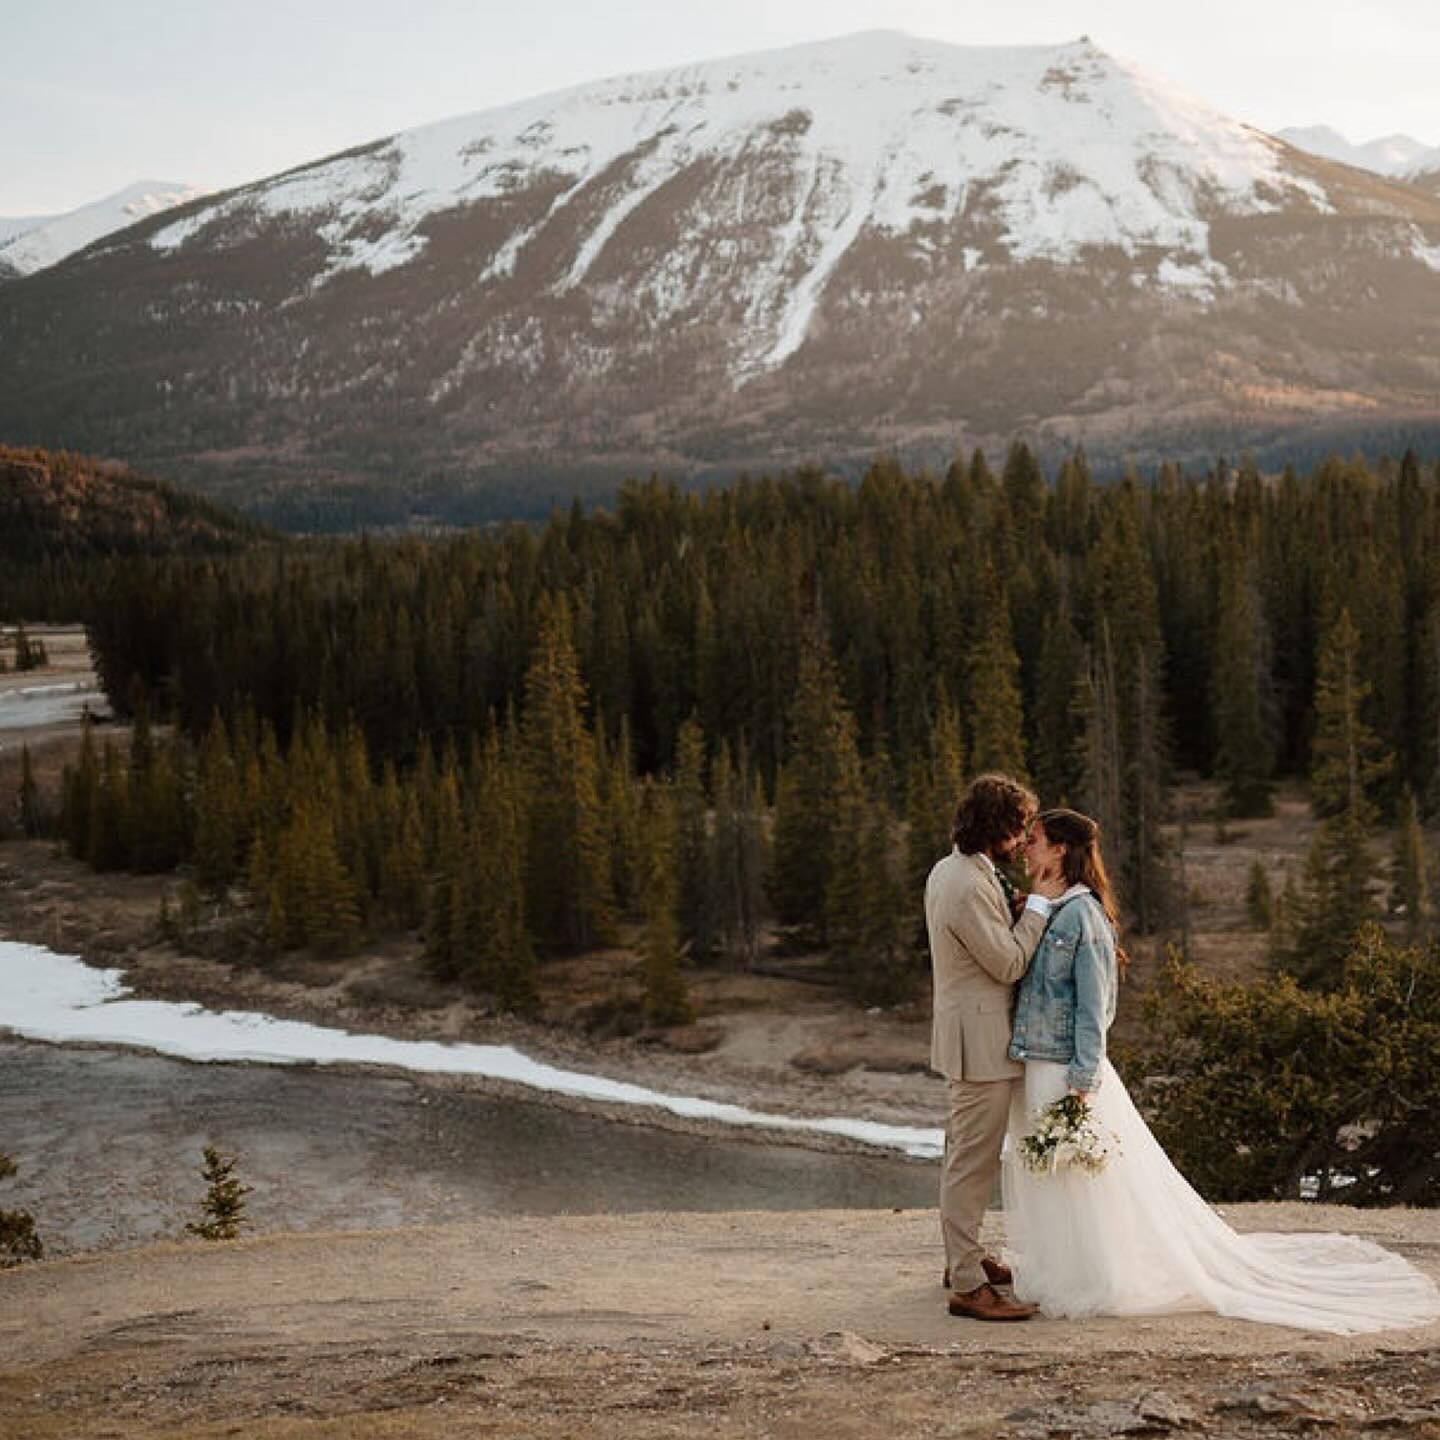 Just dreaming about this beautiful photoshoot again and figured it needed more space on my feed !💫 Already looking forward to my next trip to the mountains🏞️

Incredible images by @emmawinephotography 

Workshop: @theothersideworkshop 
Planning: @p